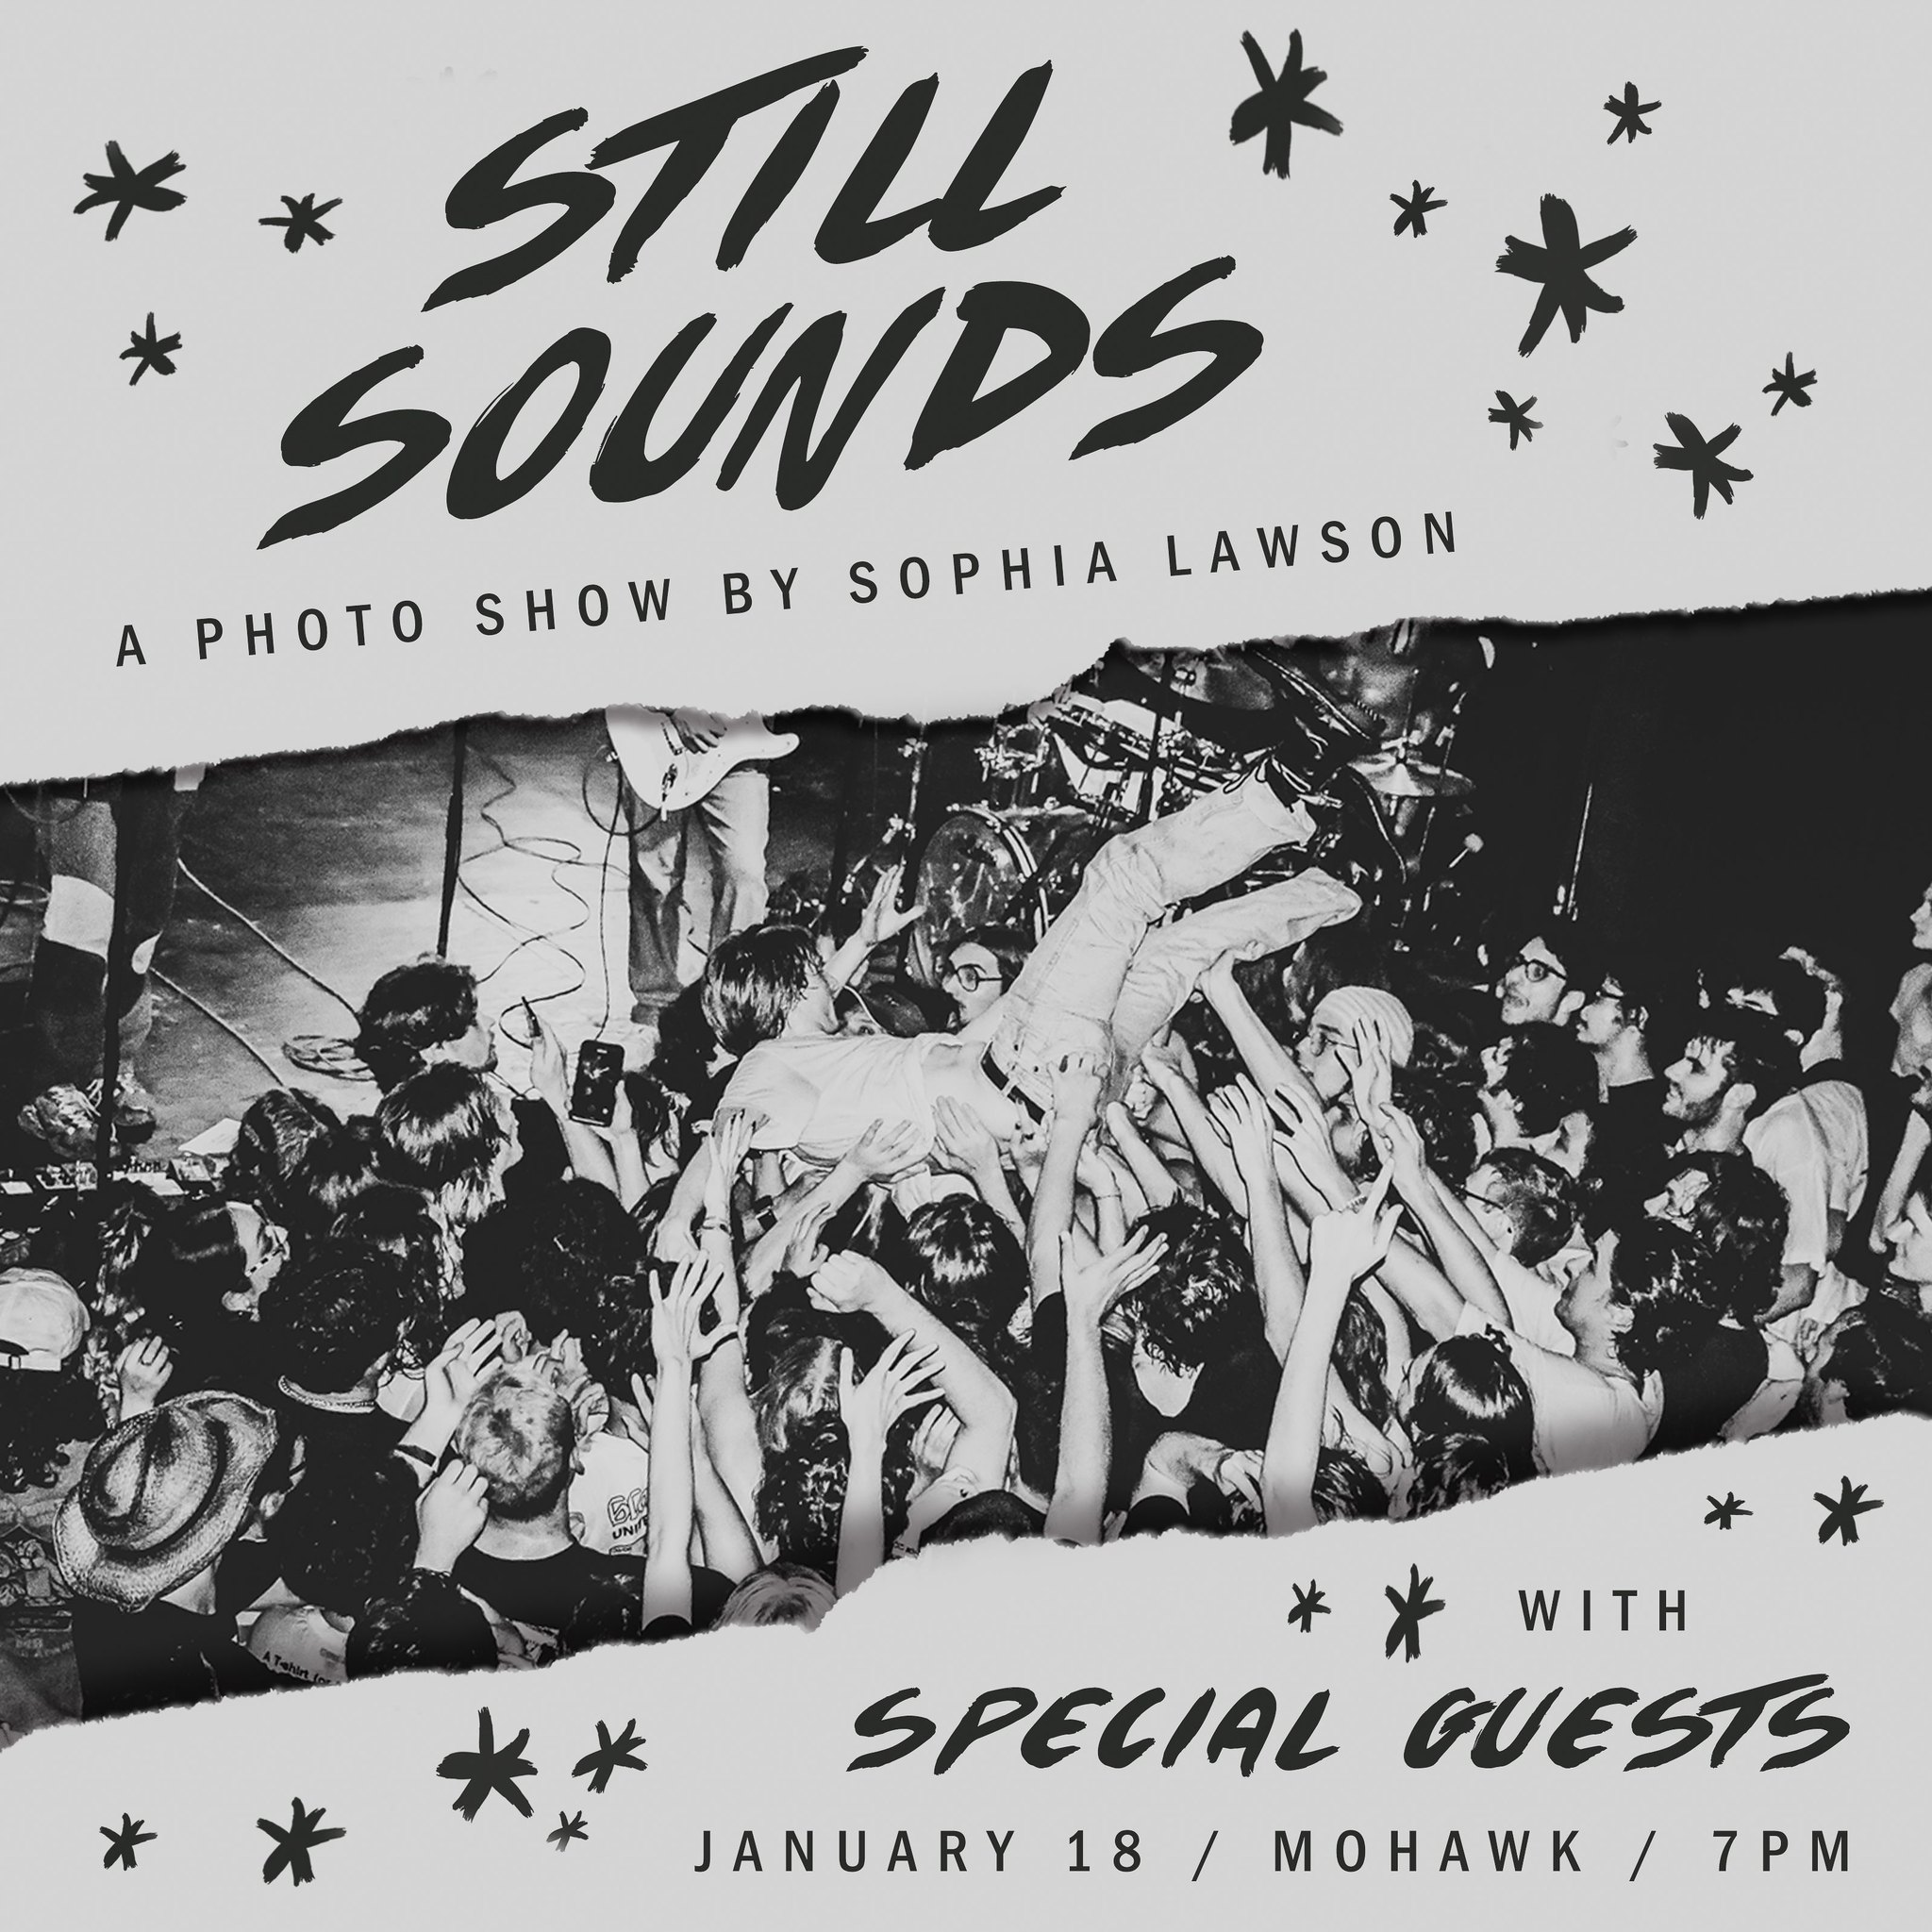 Still Sounds Feat. Photo Show by Sophia Lawson & Special Guests